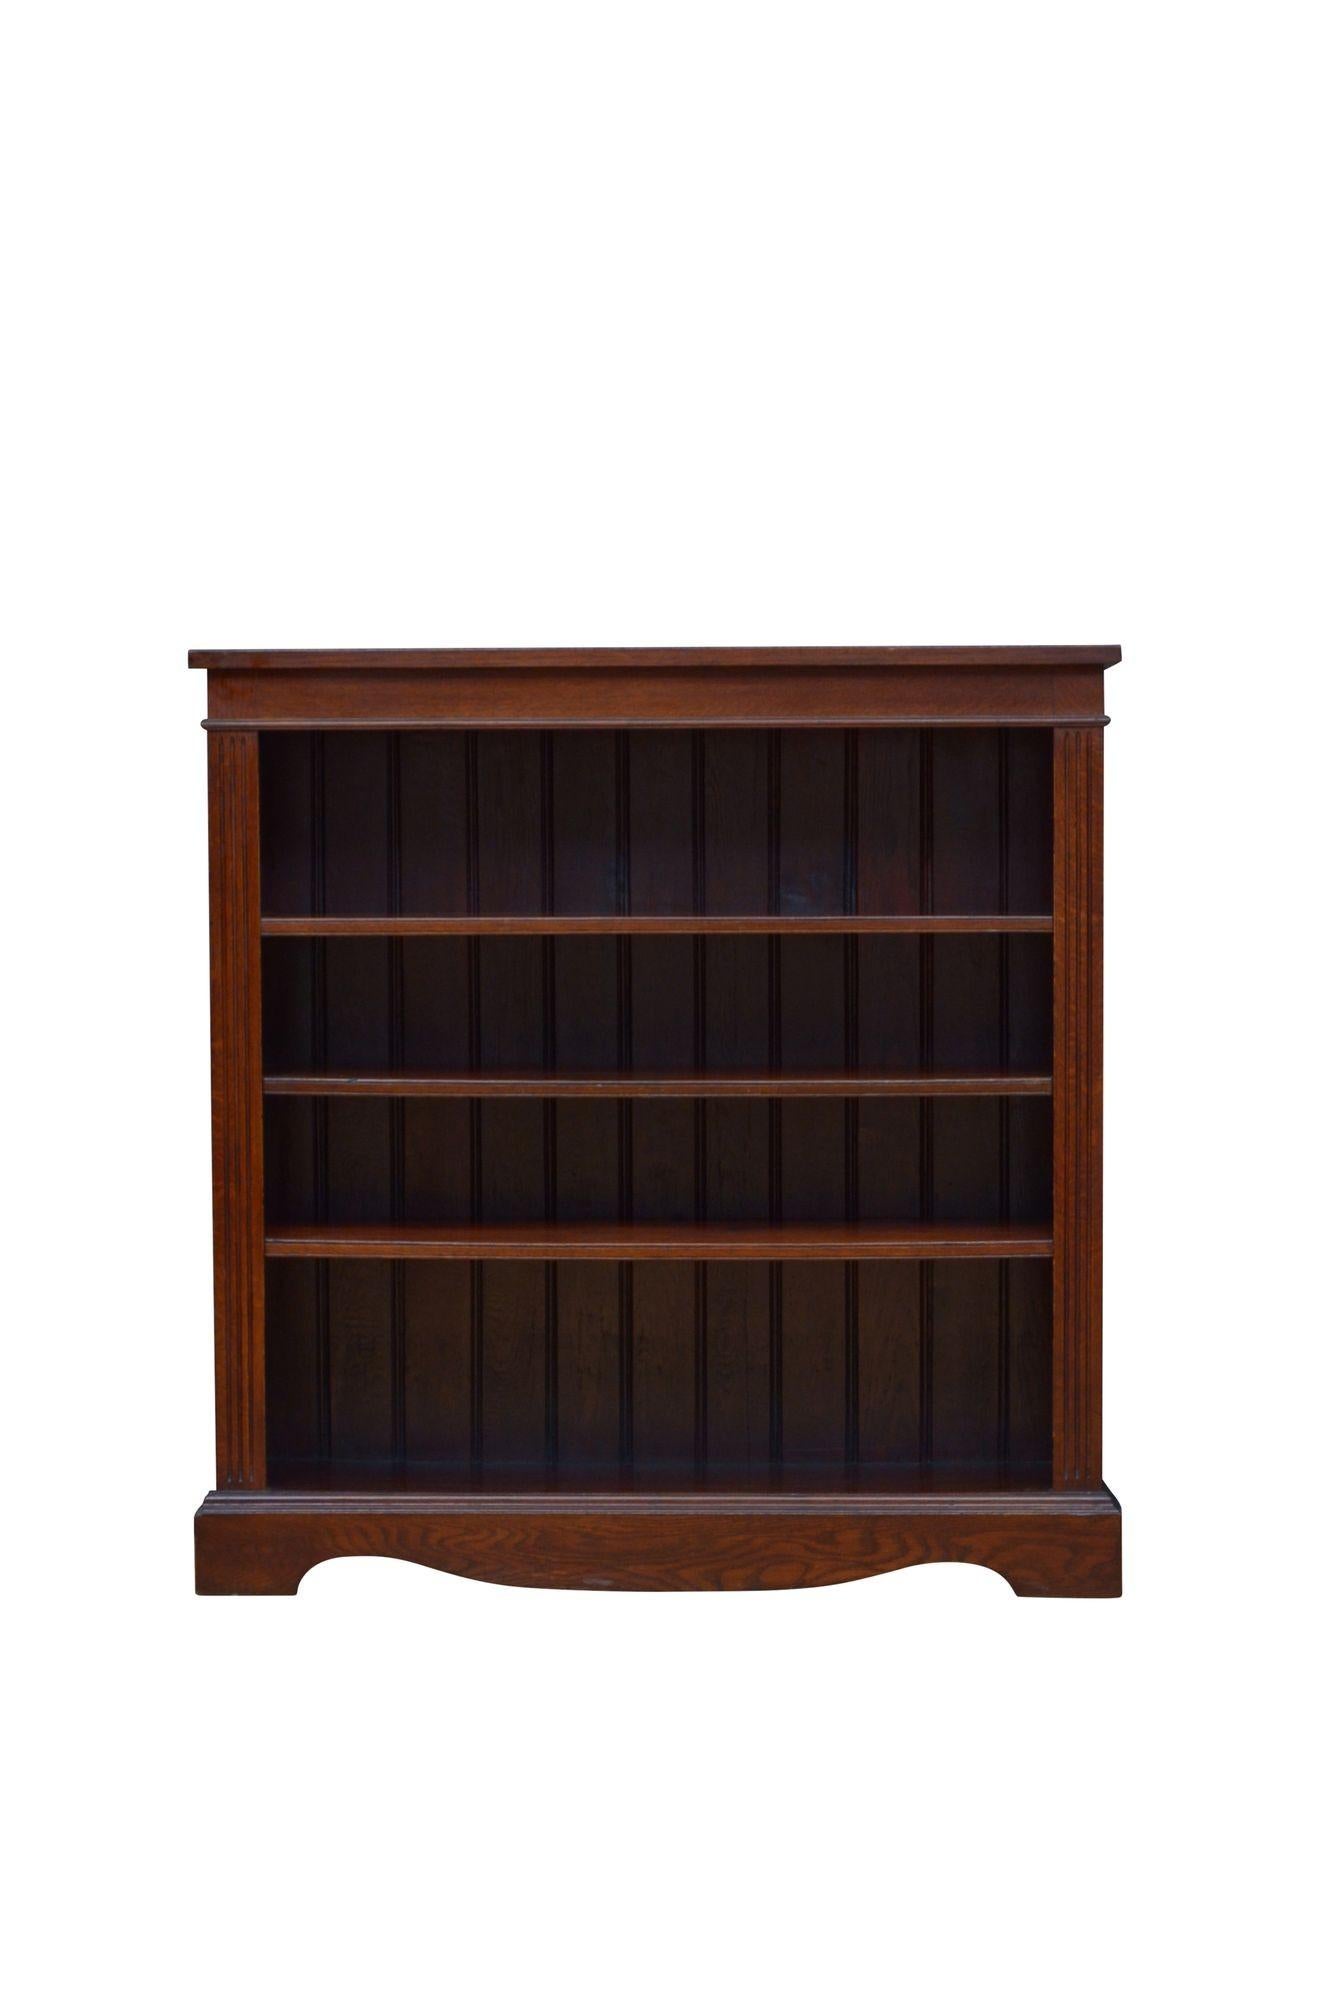 Late Victorian Solid Oak Open Bookcase In Good Condition For Sale In Whaley Bridge, GB